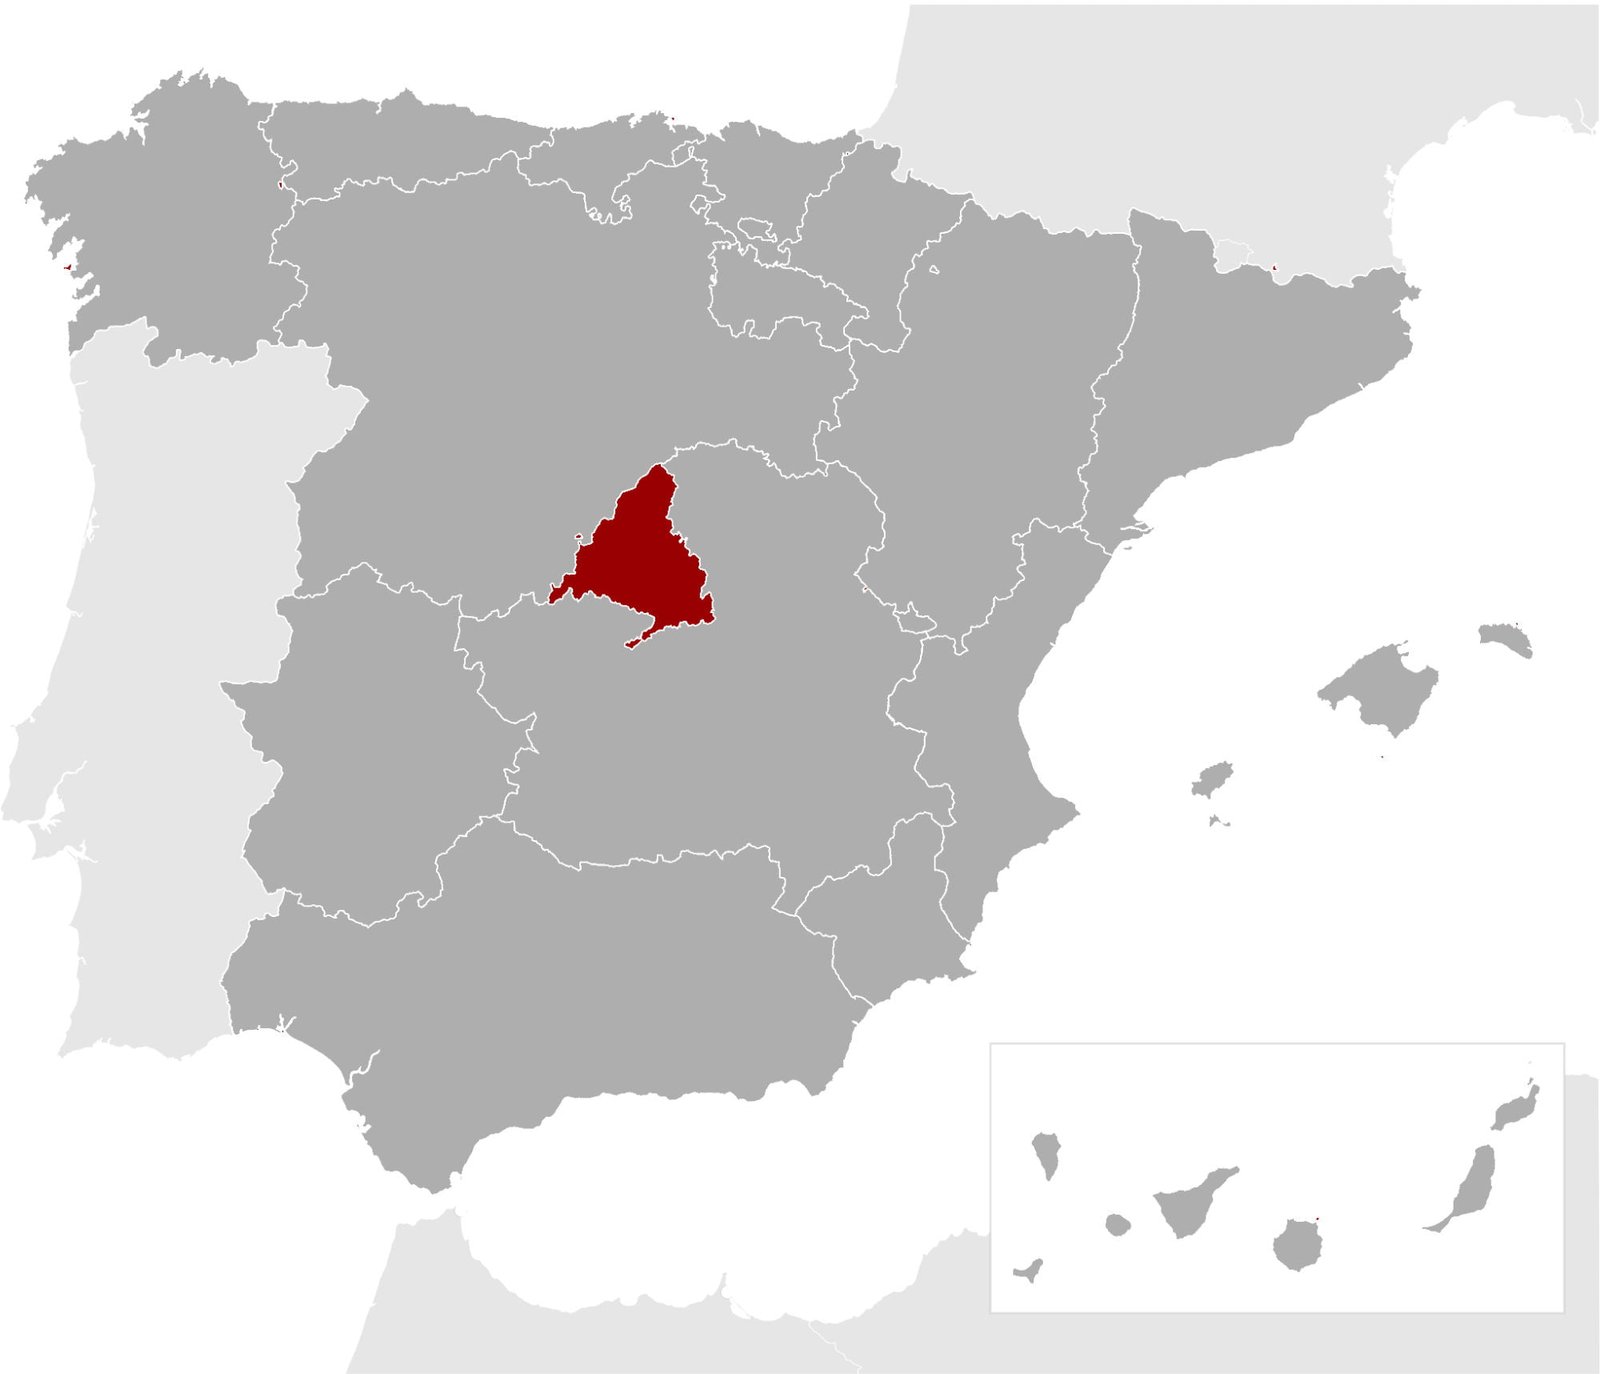 Infographic map of Spain showing the center region of madrid highlighted in red